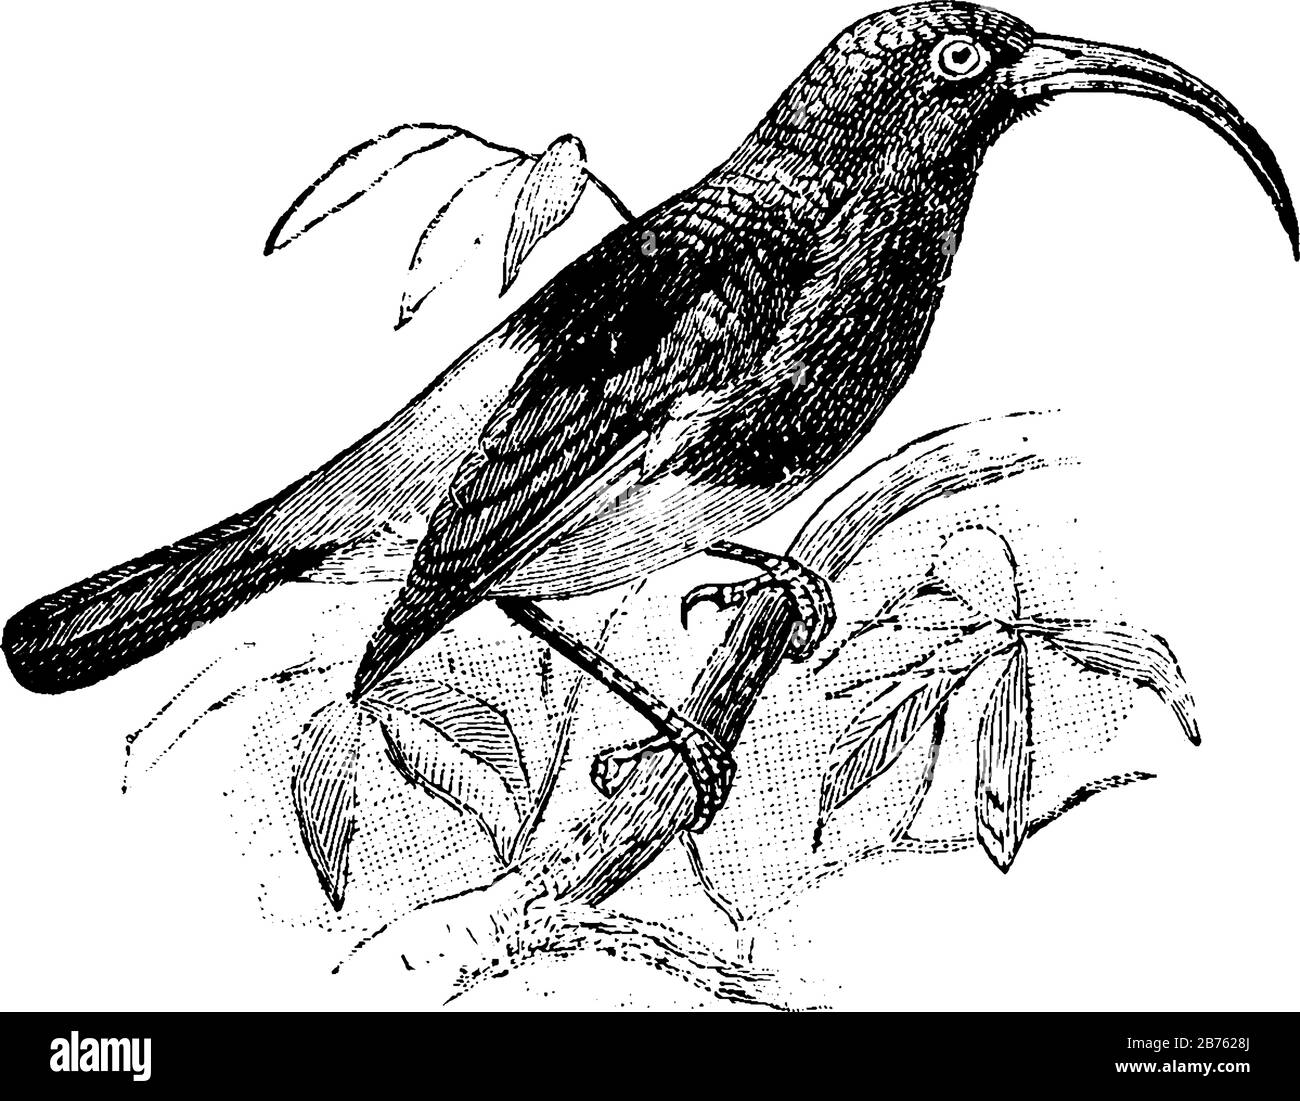 Sickle Billed Sunbird with a long downward curved bill, vintage line drawing or engraving illustration. Stock Vector